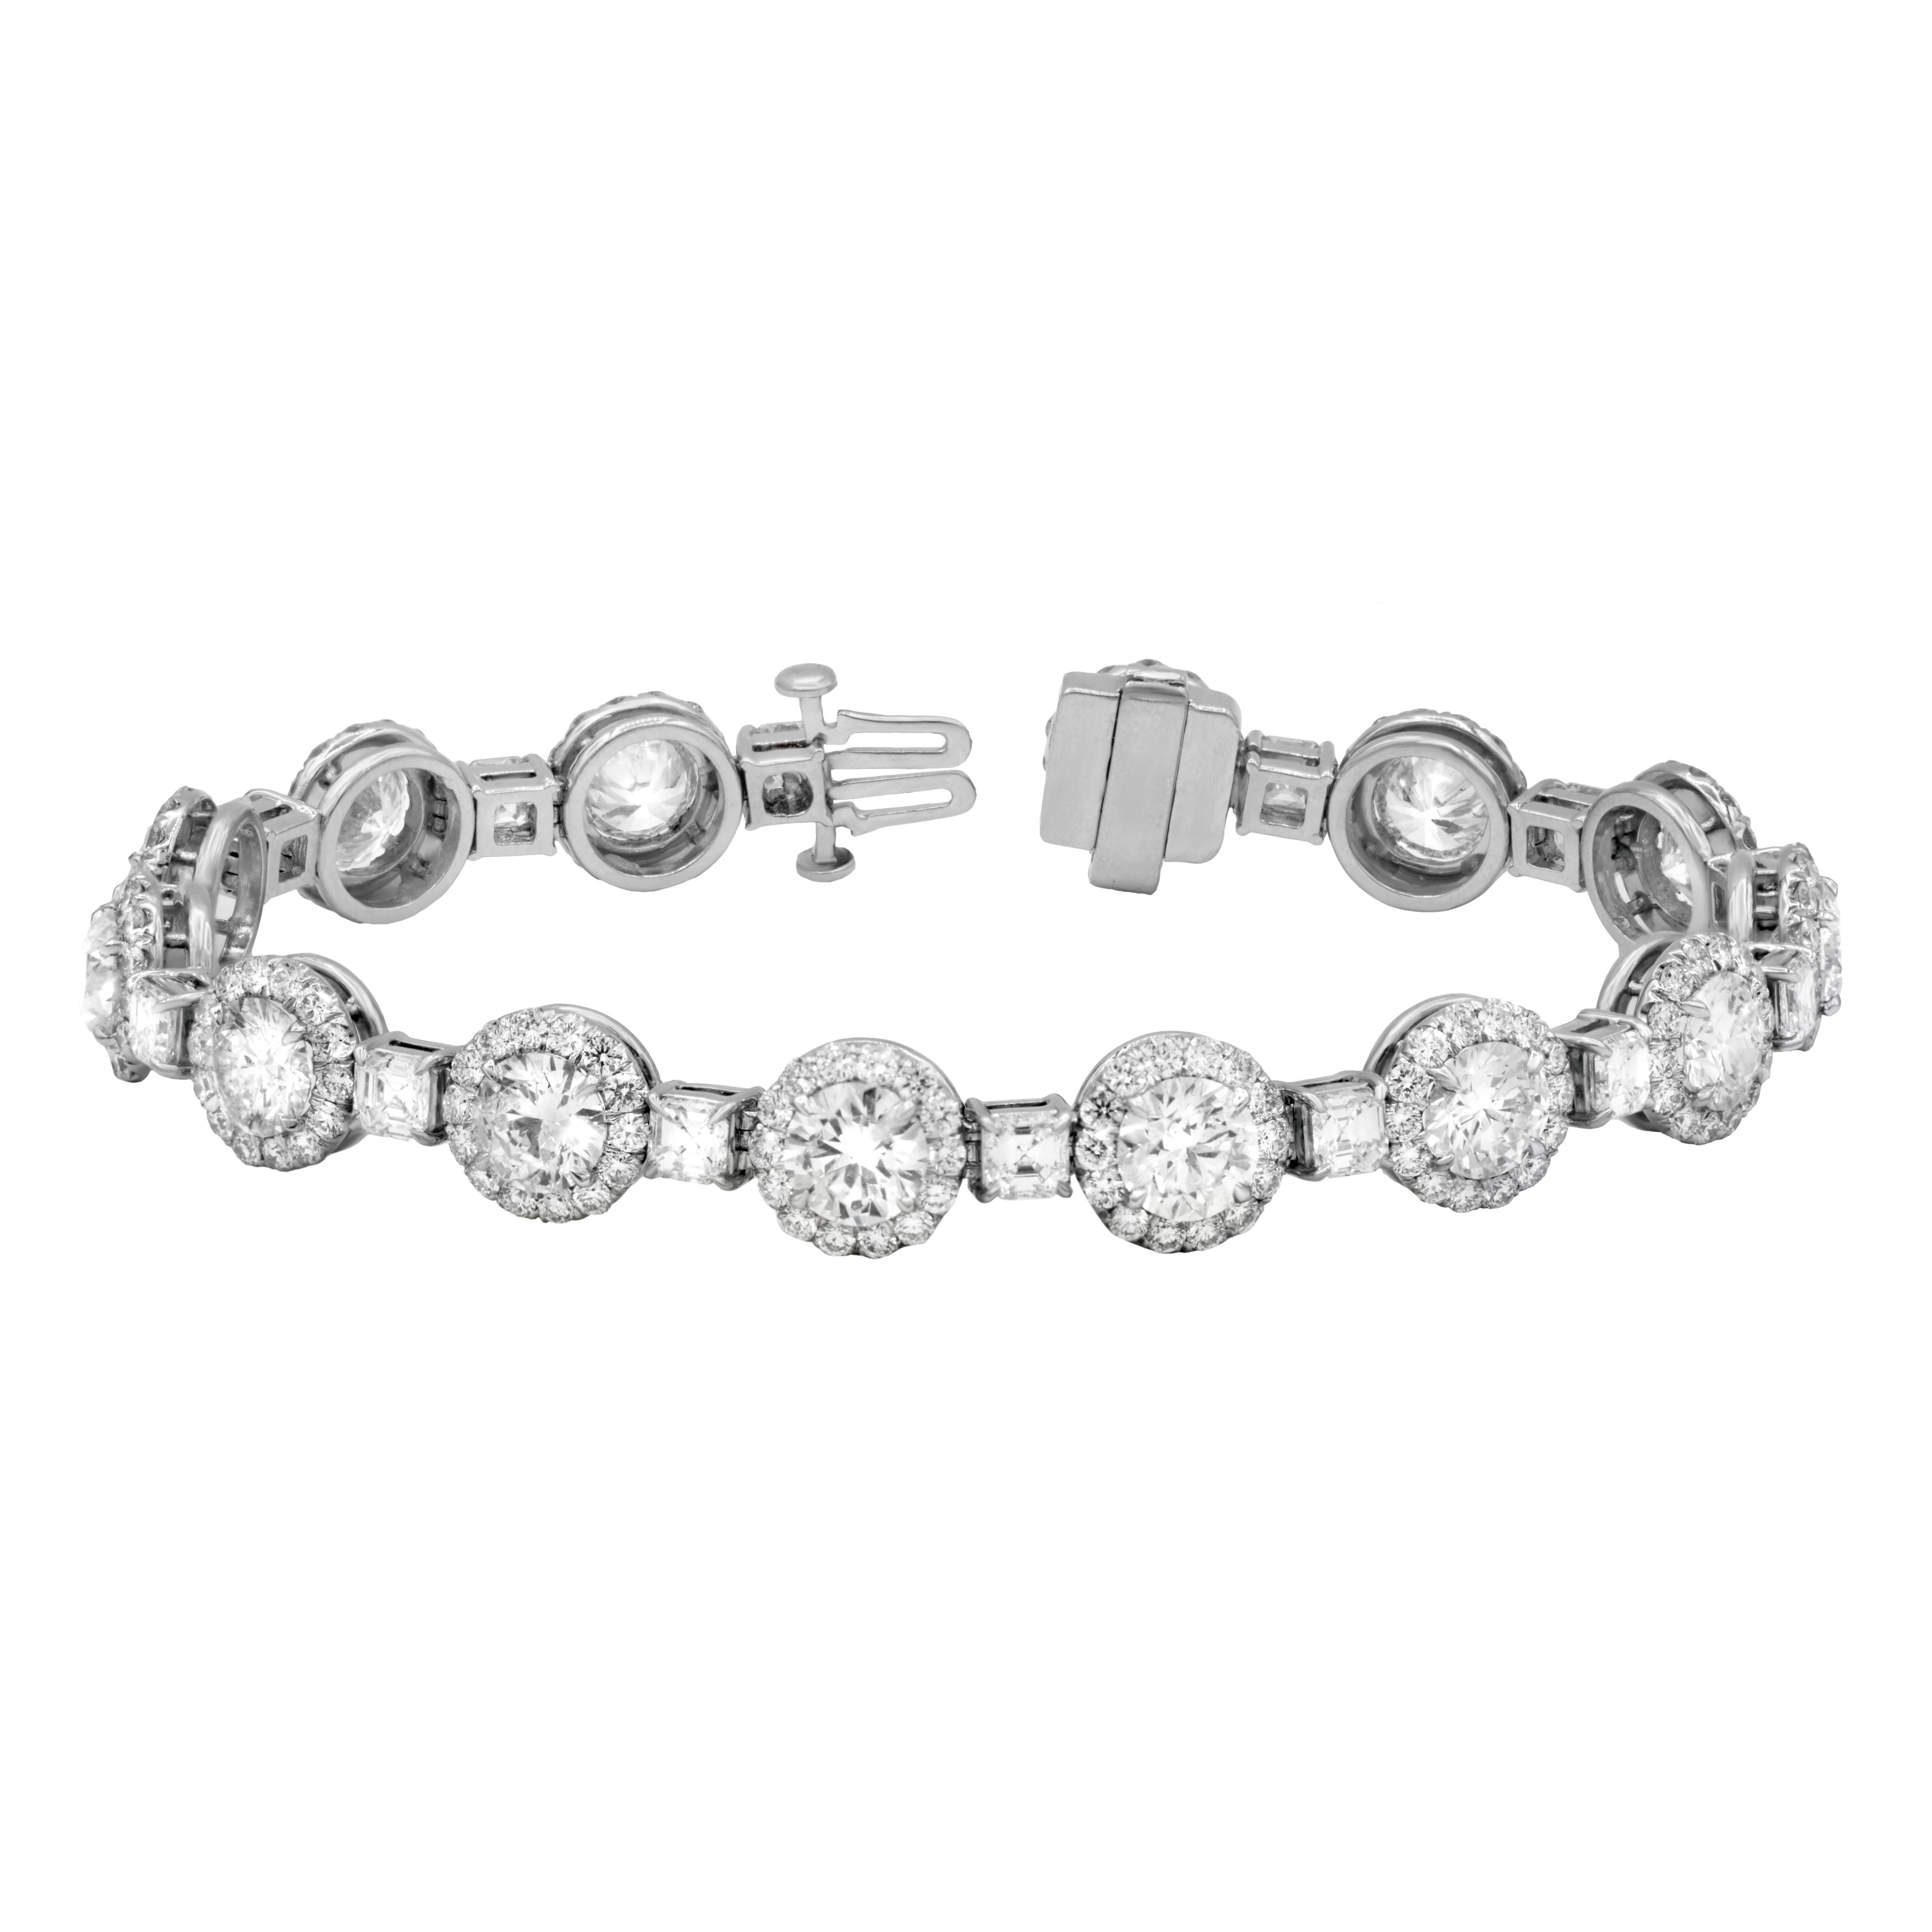 Magnificent platinum diamond tennis bracelet adorned with large round diamonds surrounded by micropave round diamonds and separated by asscher cut diamonds totaling 17.40 cts
Diana M. is a leading supplier of top-quality fine jewelry for over 35